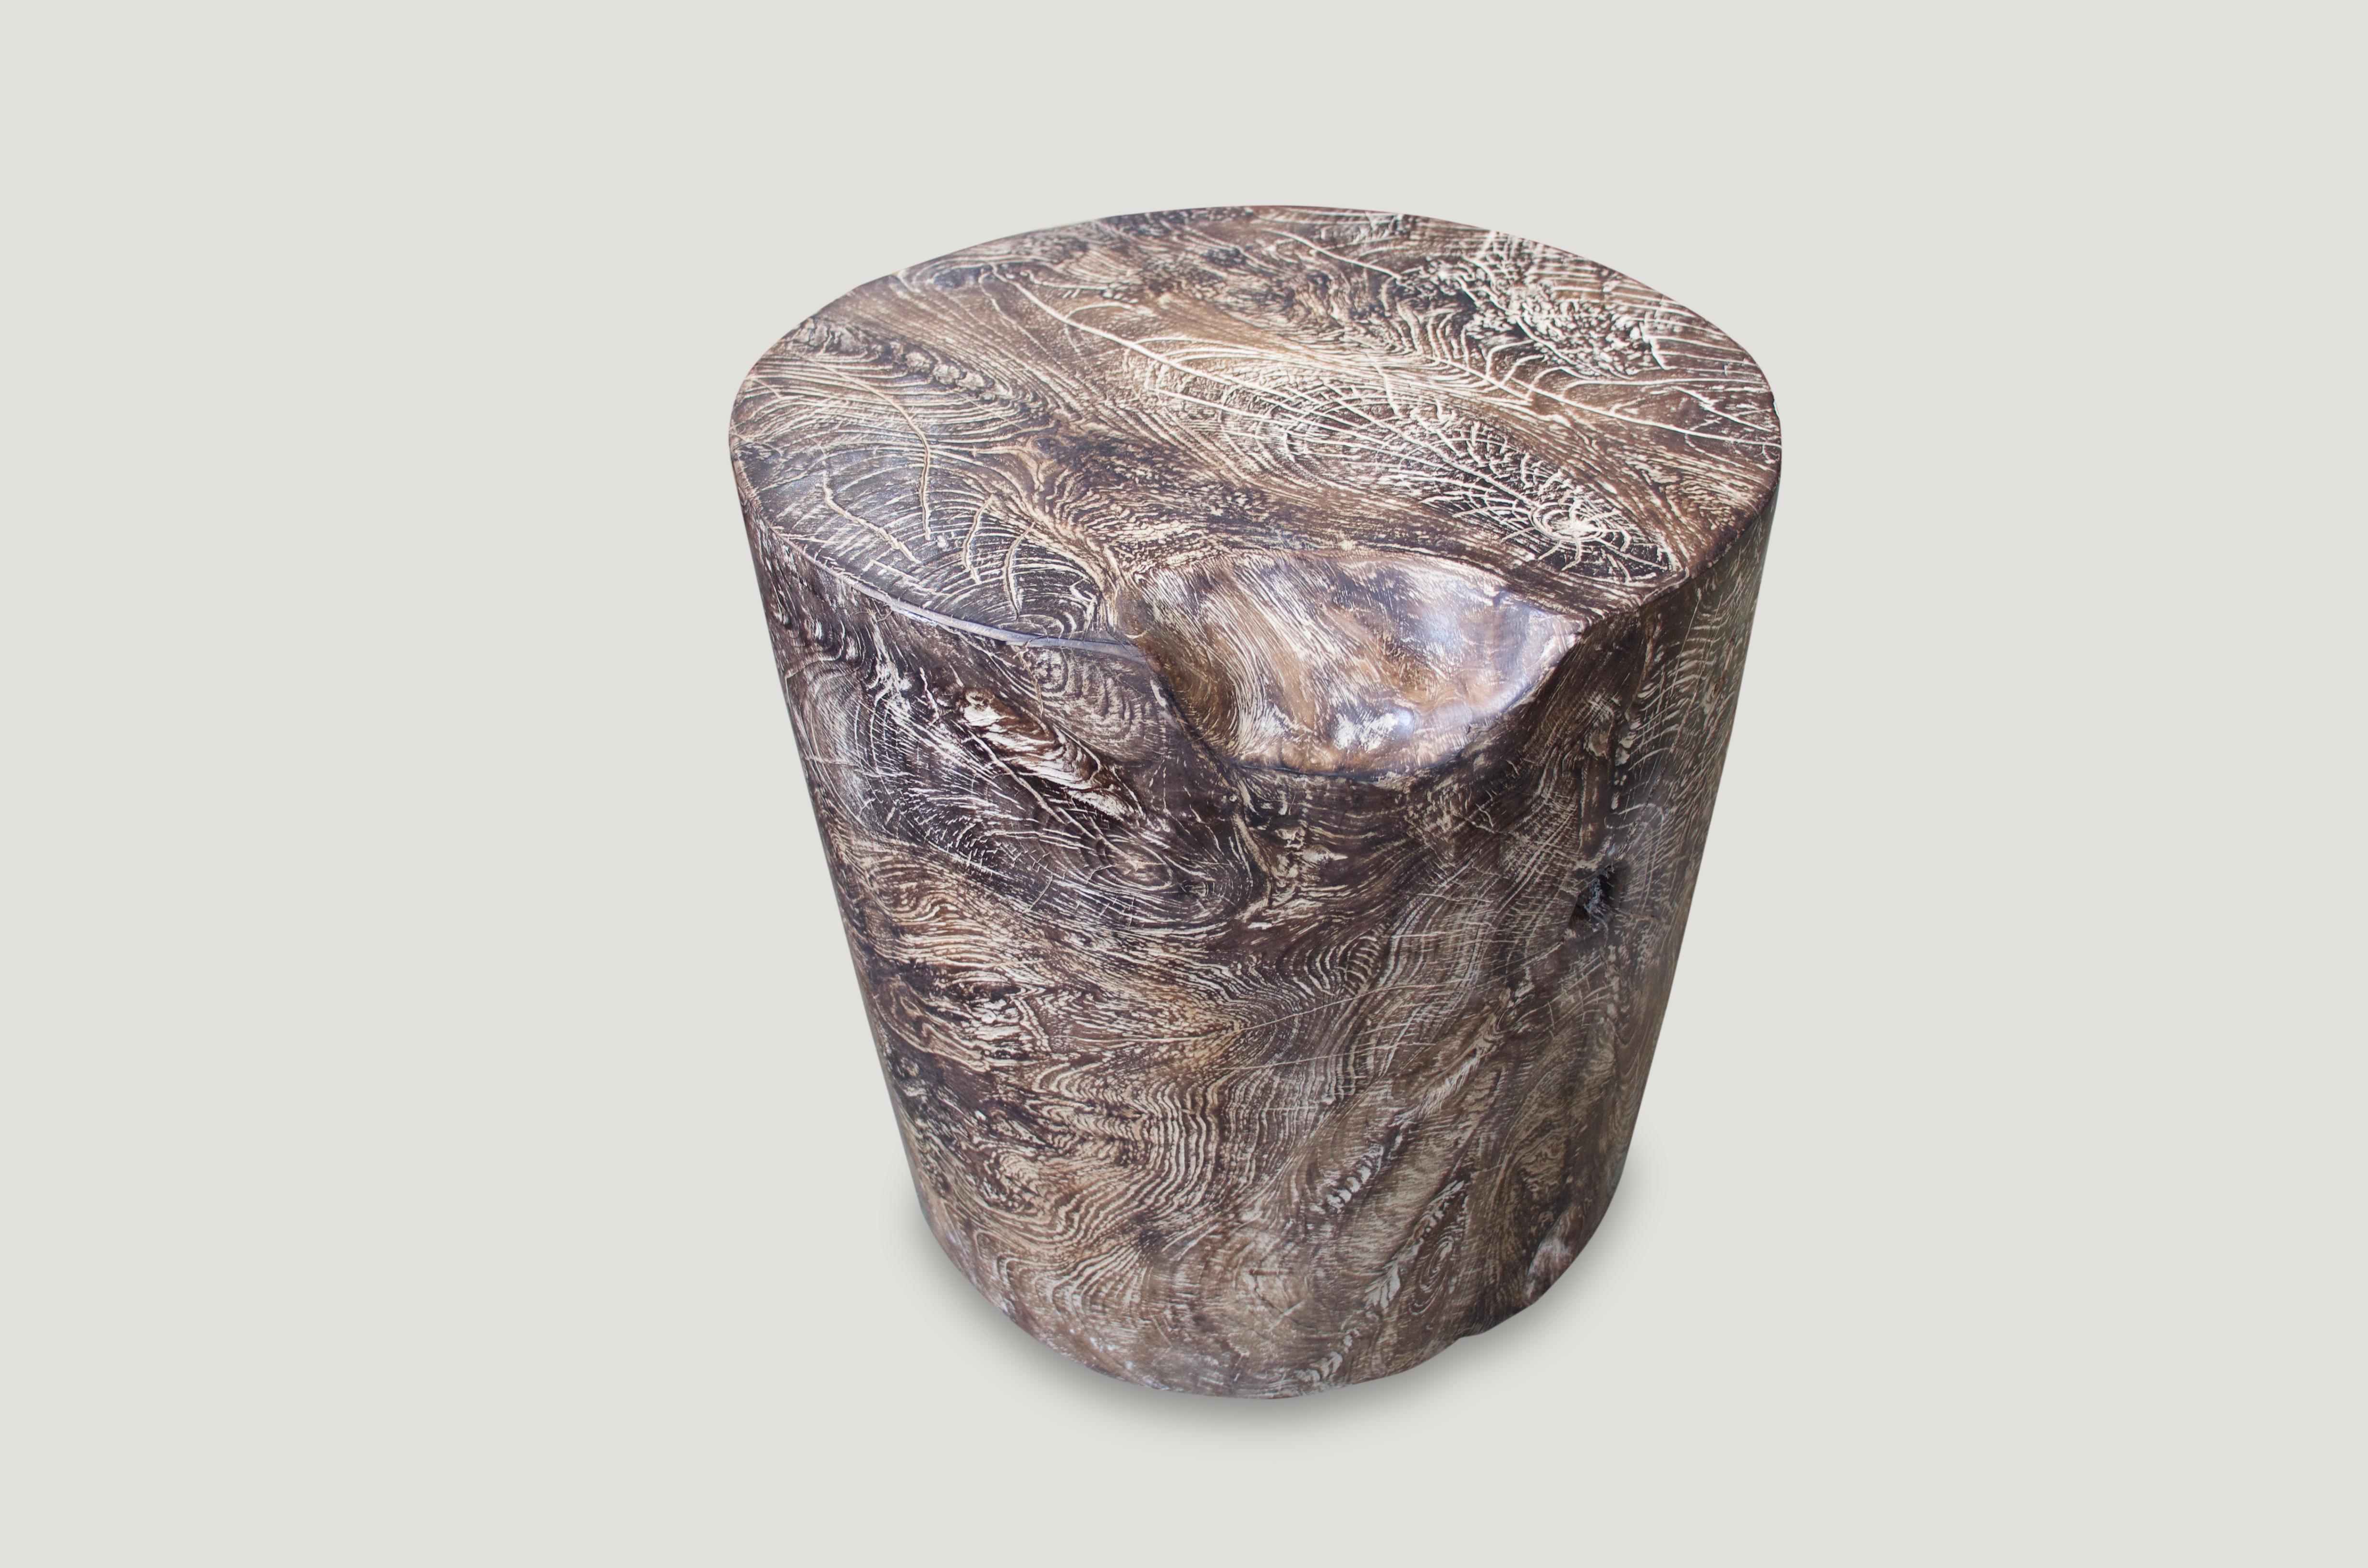 Reclaimed teak wood side table carved from a single reclaimed aged teak root. Charred one time with an added cerused finish. A perfect combination of modern and organic.

Andrianna Shamaris. The Leader In Modern Organic Design.